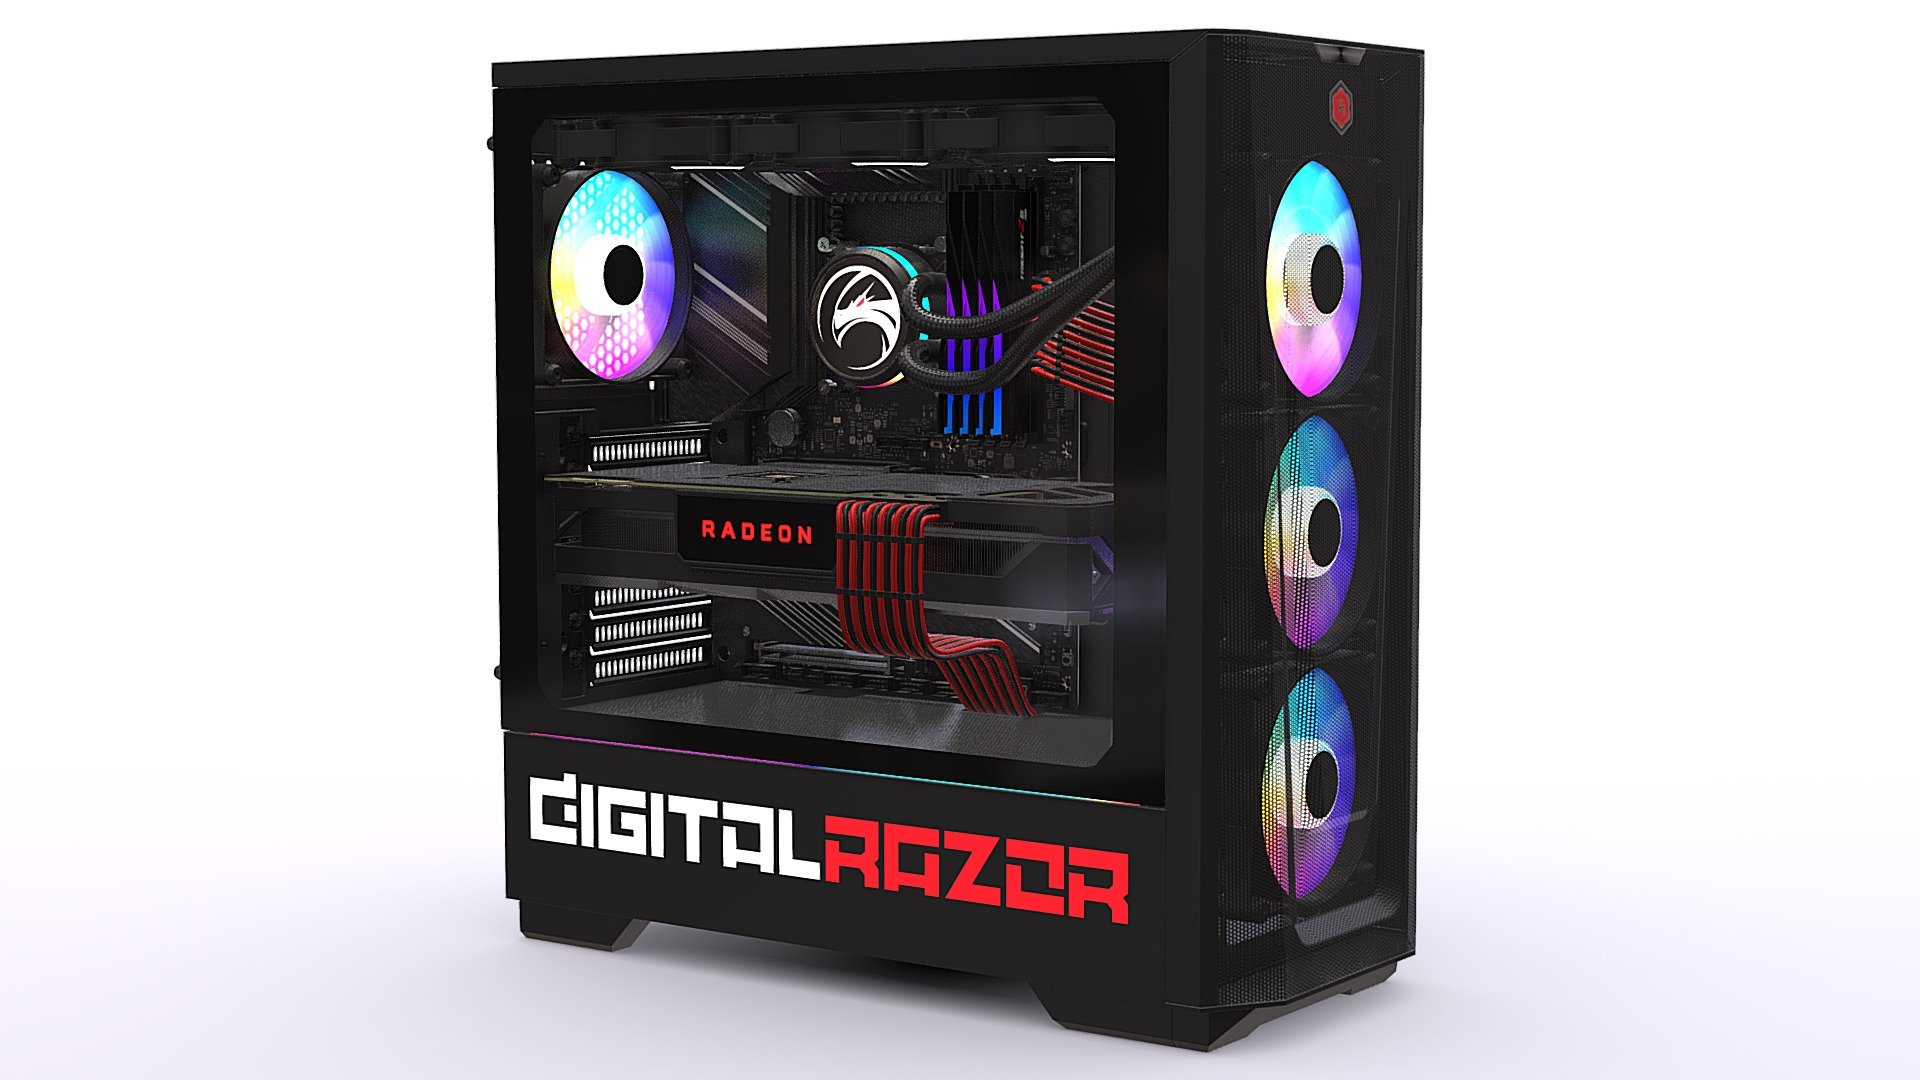 High-detailed 3d model of Gaming PC

Ready to use in any software

All logos can be easily removed or replaced with your own 3d model